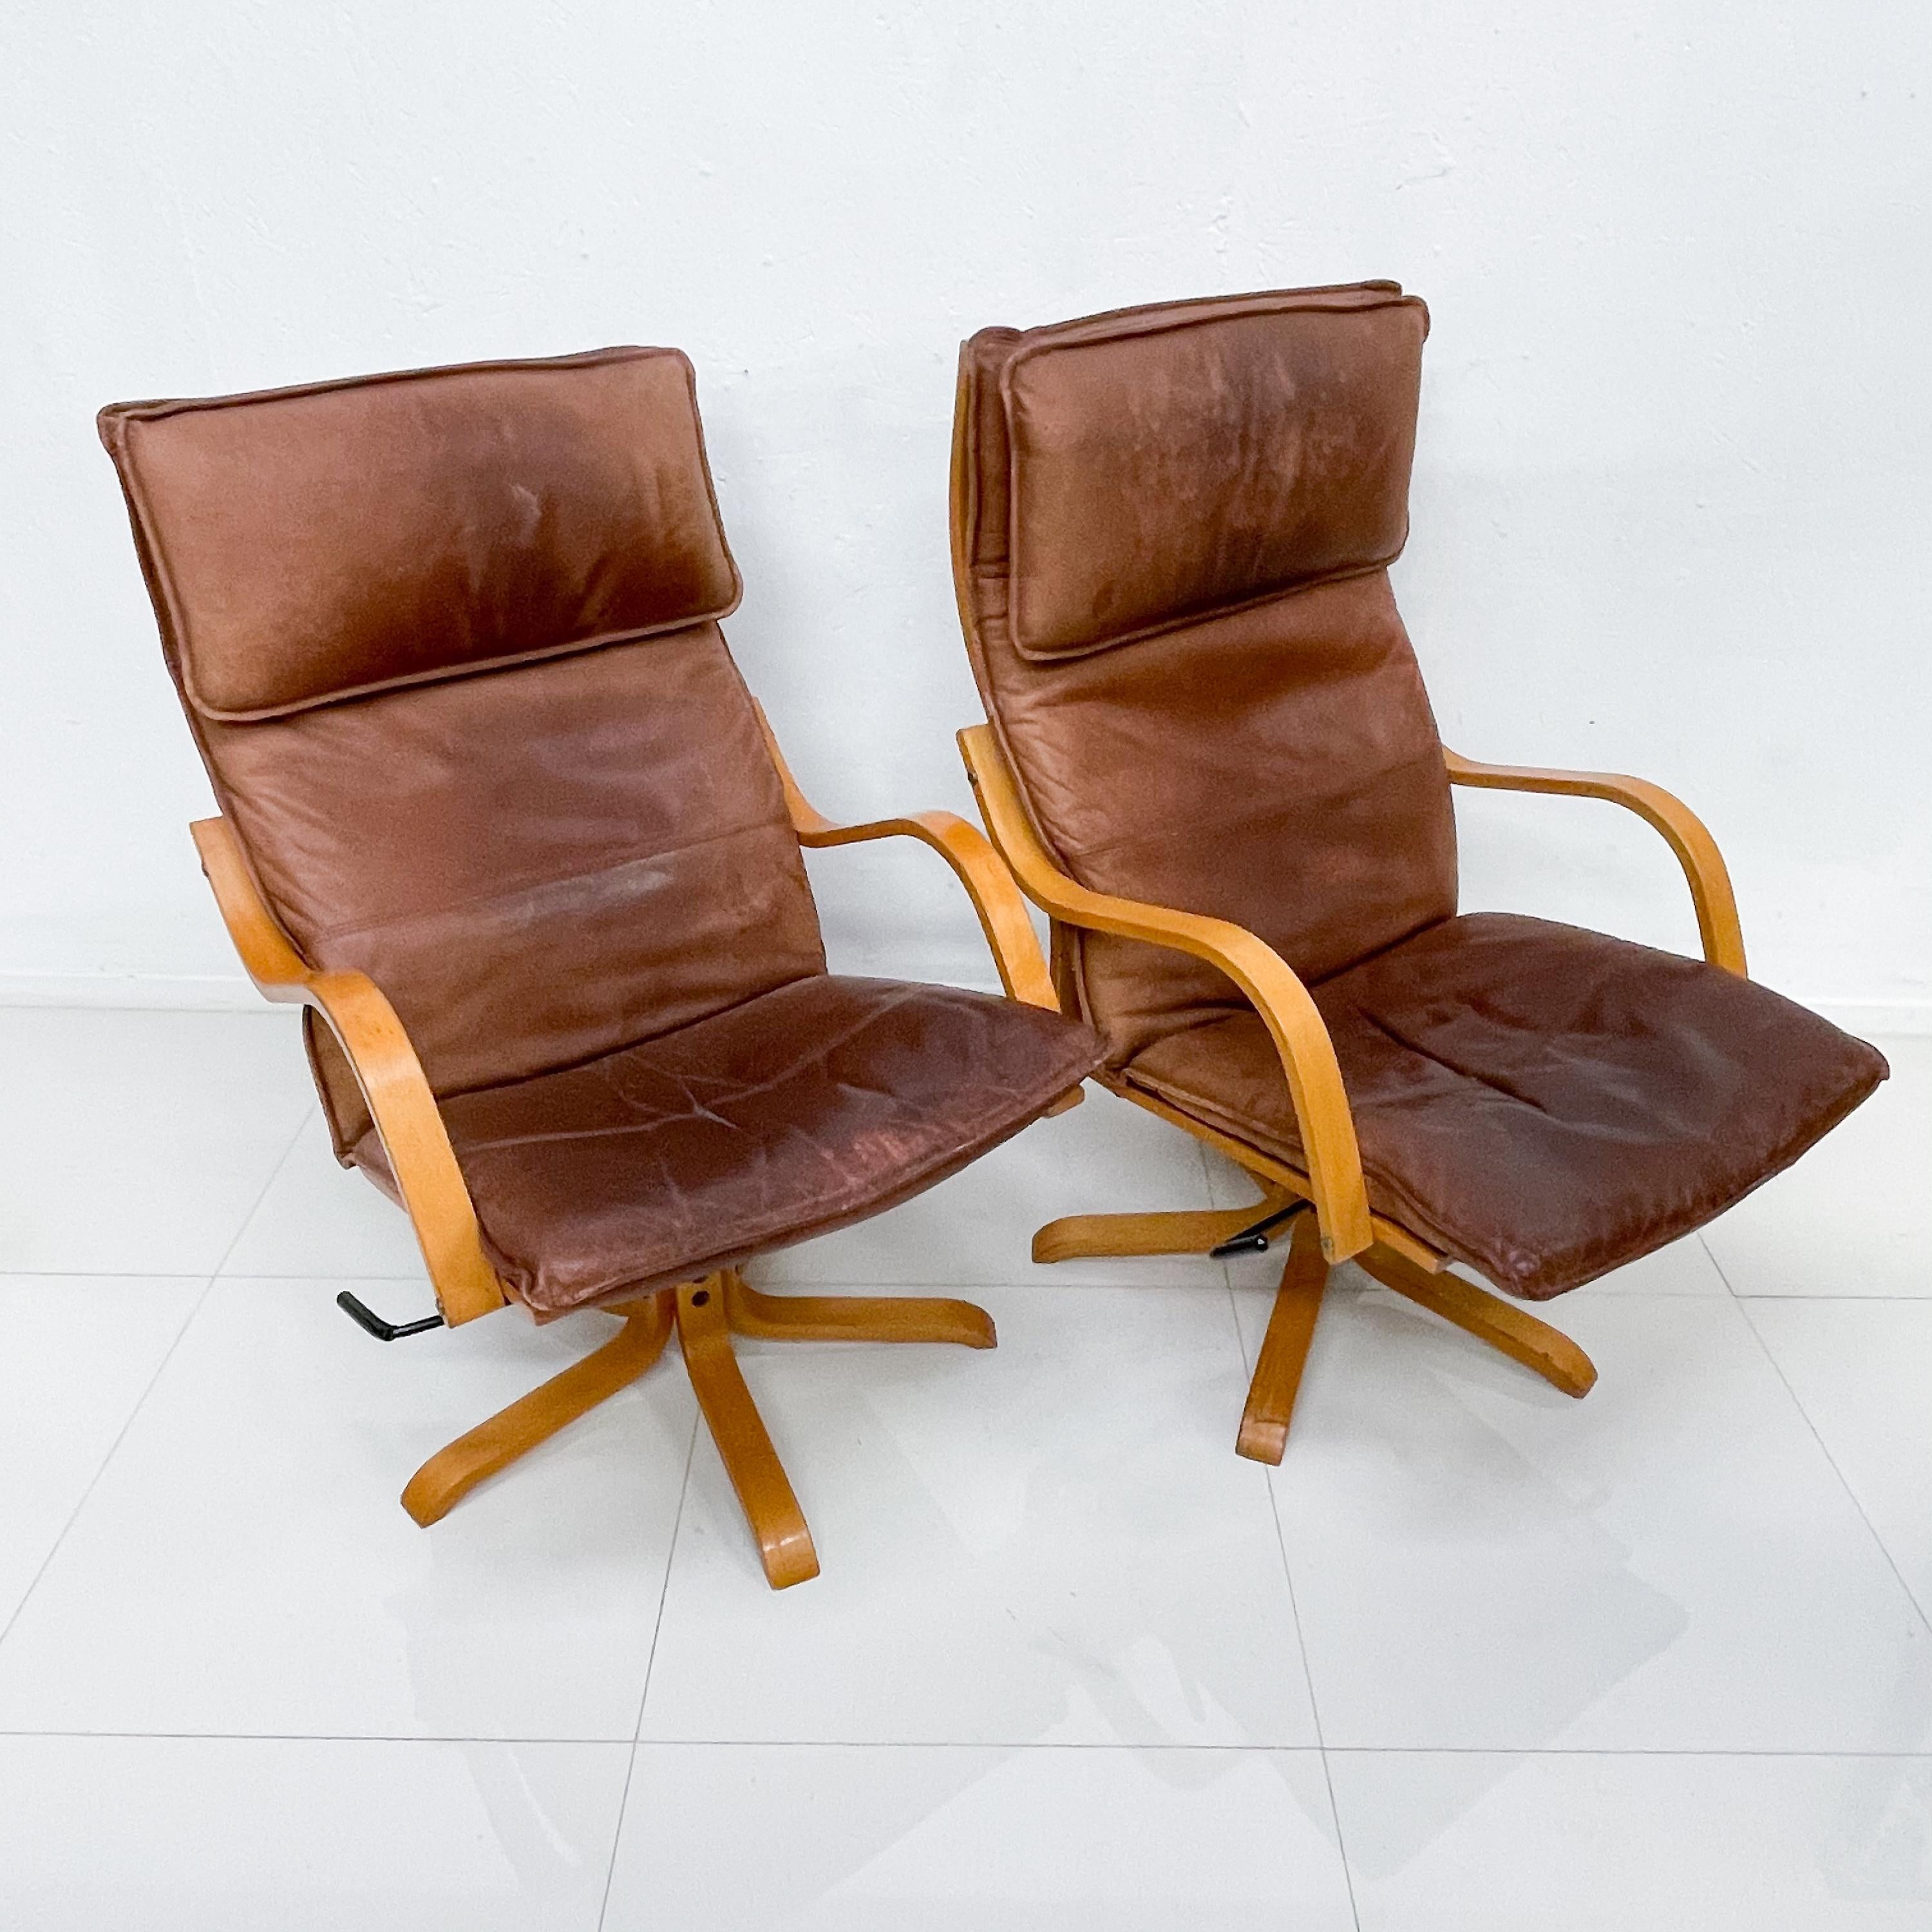 1960s Scandinavian style set of two vintage tall leather lounge chairs on a blonde wood star base Italian Swiss design made in Italy. Manner of De Sede and Vatne Mobler.
 No information on the maker available. 
Price is per set of two chairs.